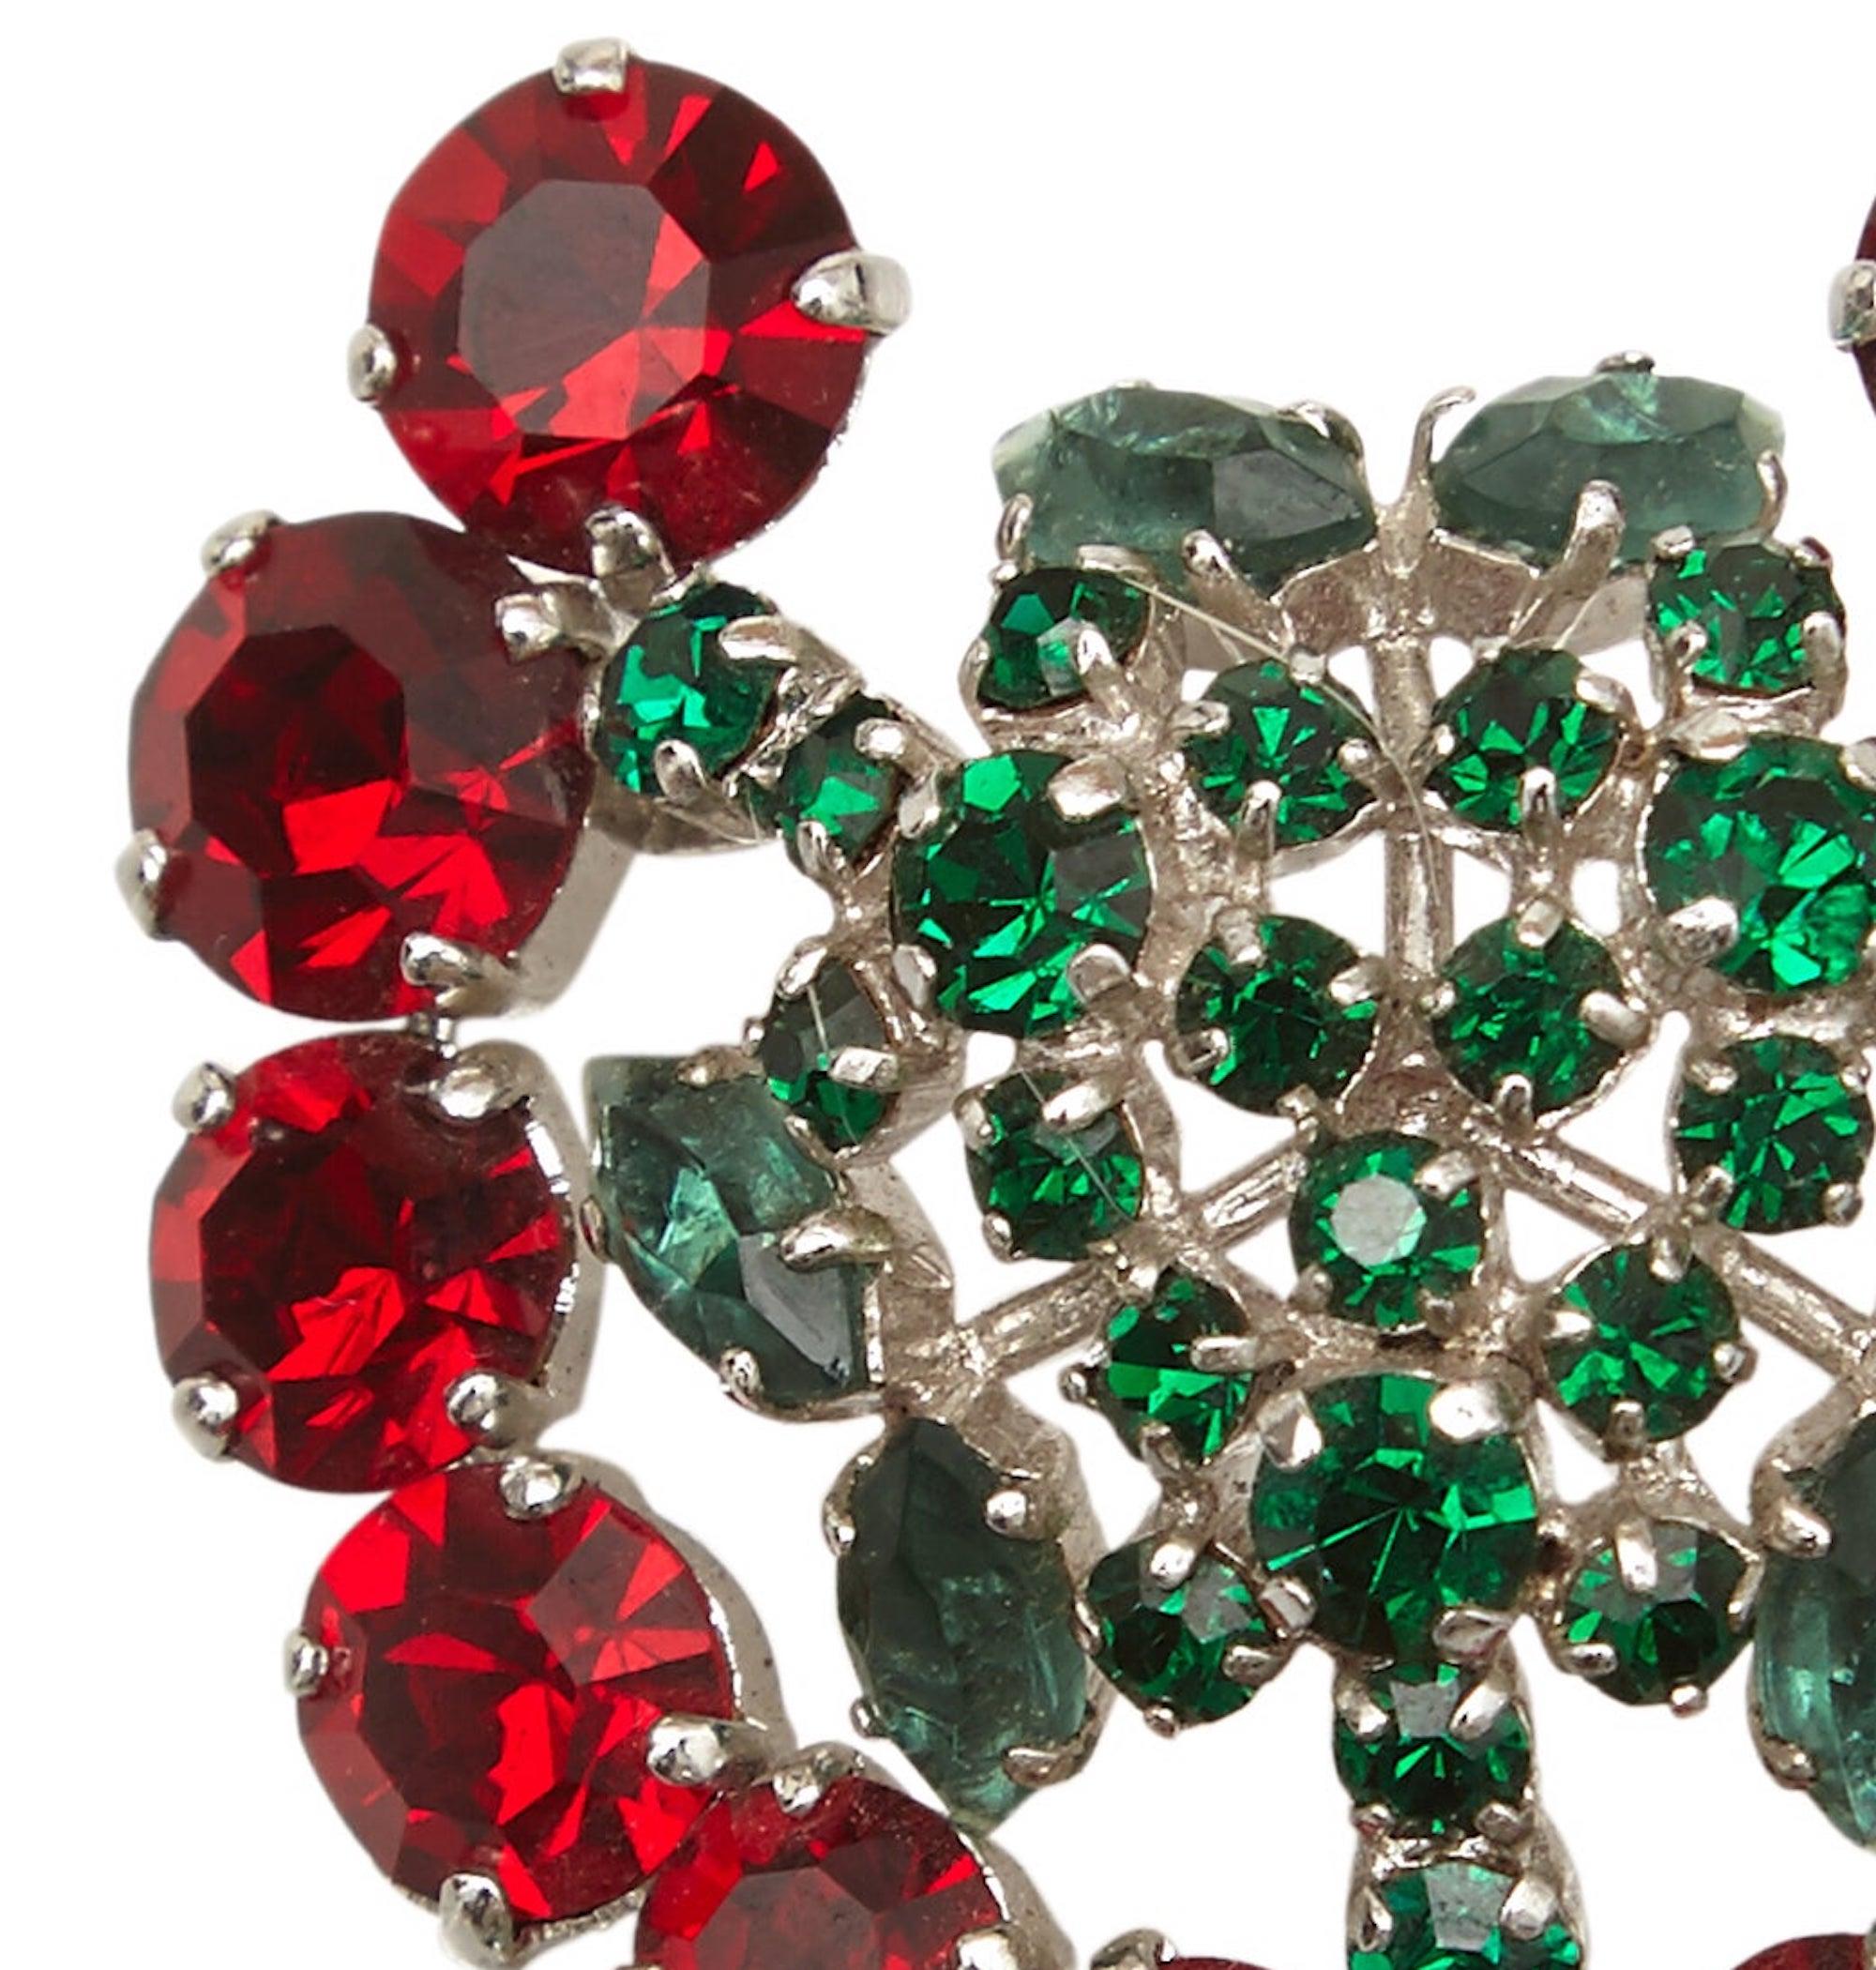 This desirable 1950s pin brooch with emerald green and ruby red prong set gemstones is Christian Dior by Henkel and Grosse and is in excellent vintage condition.  Rhodium plated, the green stones are prong set in two elaborate dome shaped